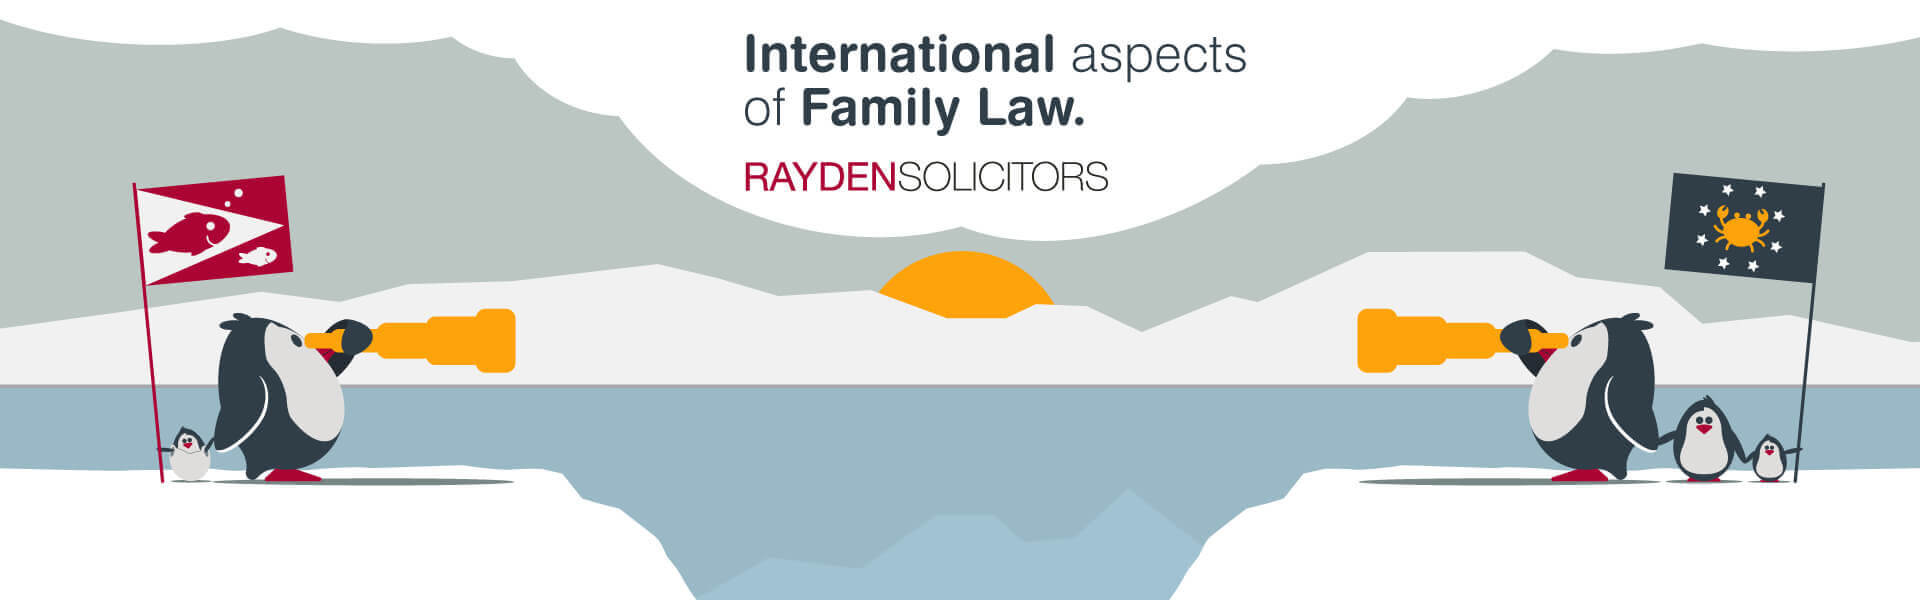 International aspects of family law at Rayden Solicitors